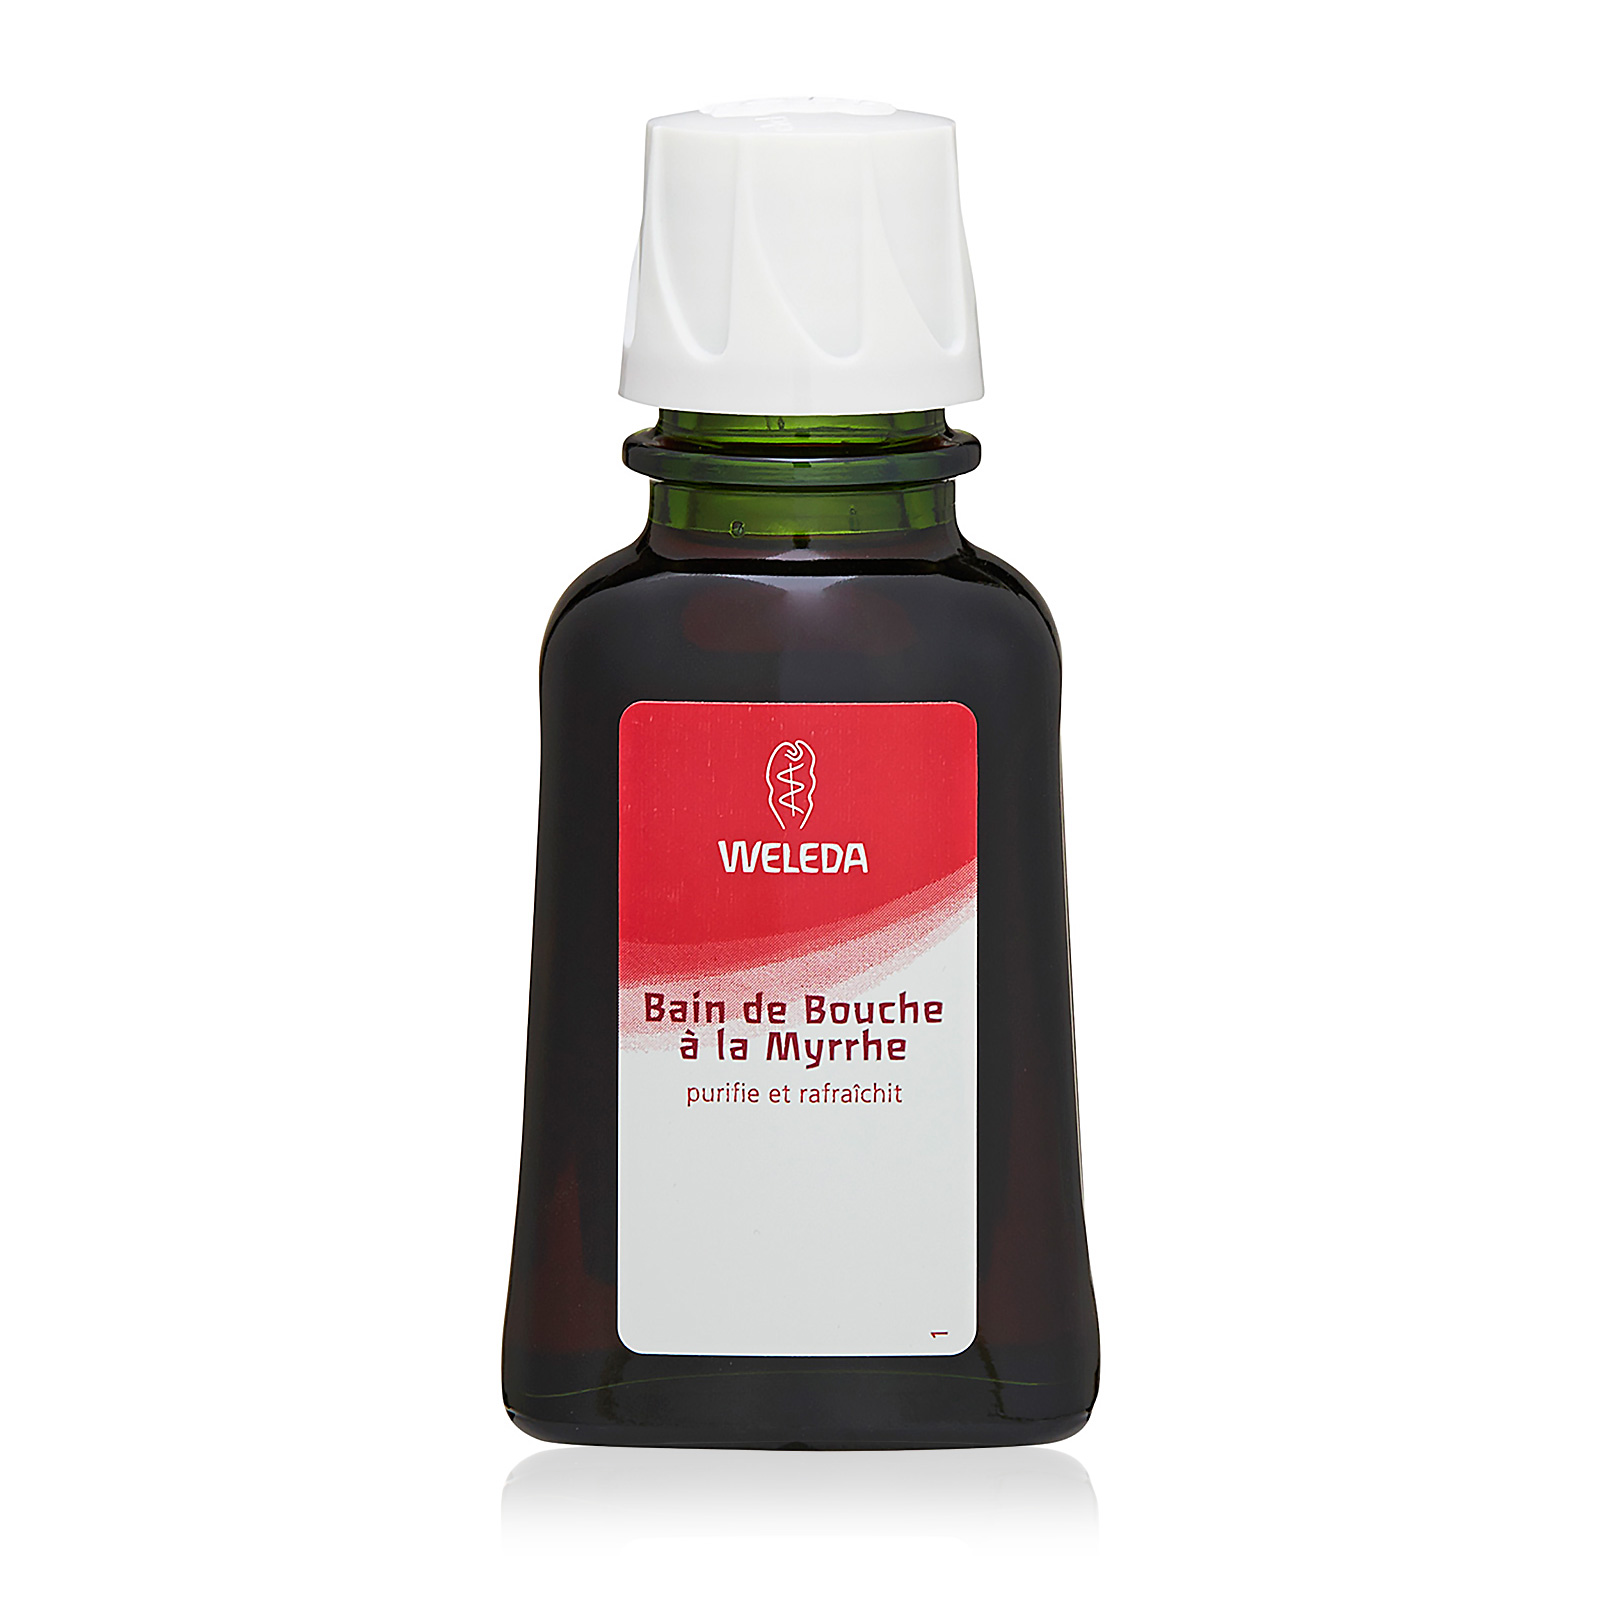 Ratanhia Mouthwash Concentrate